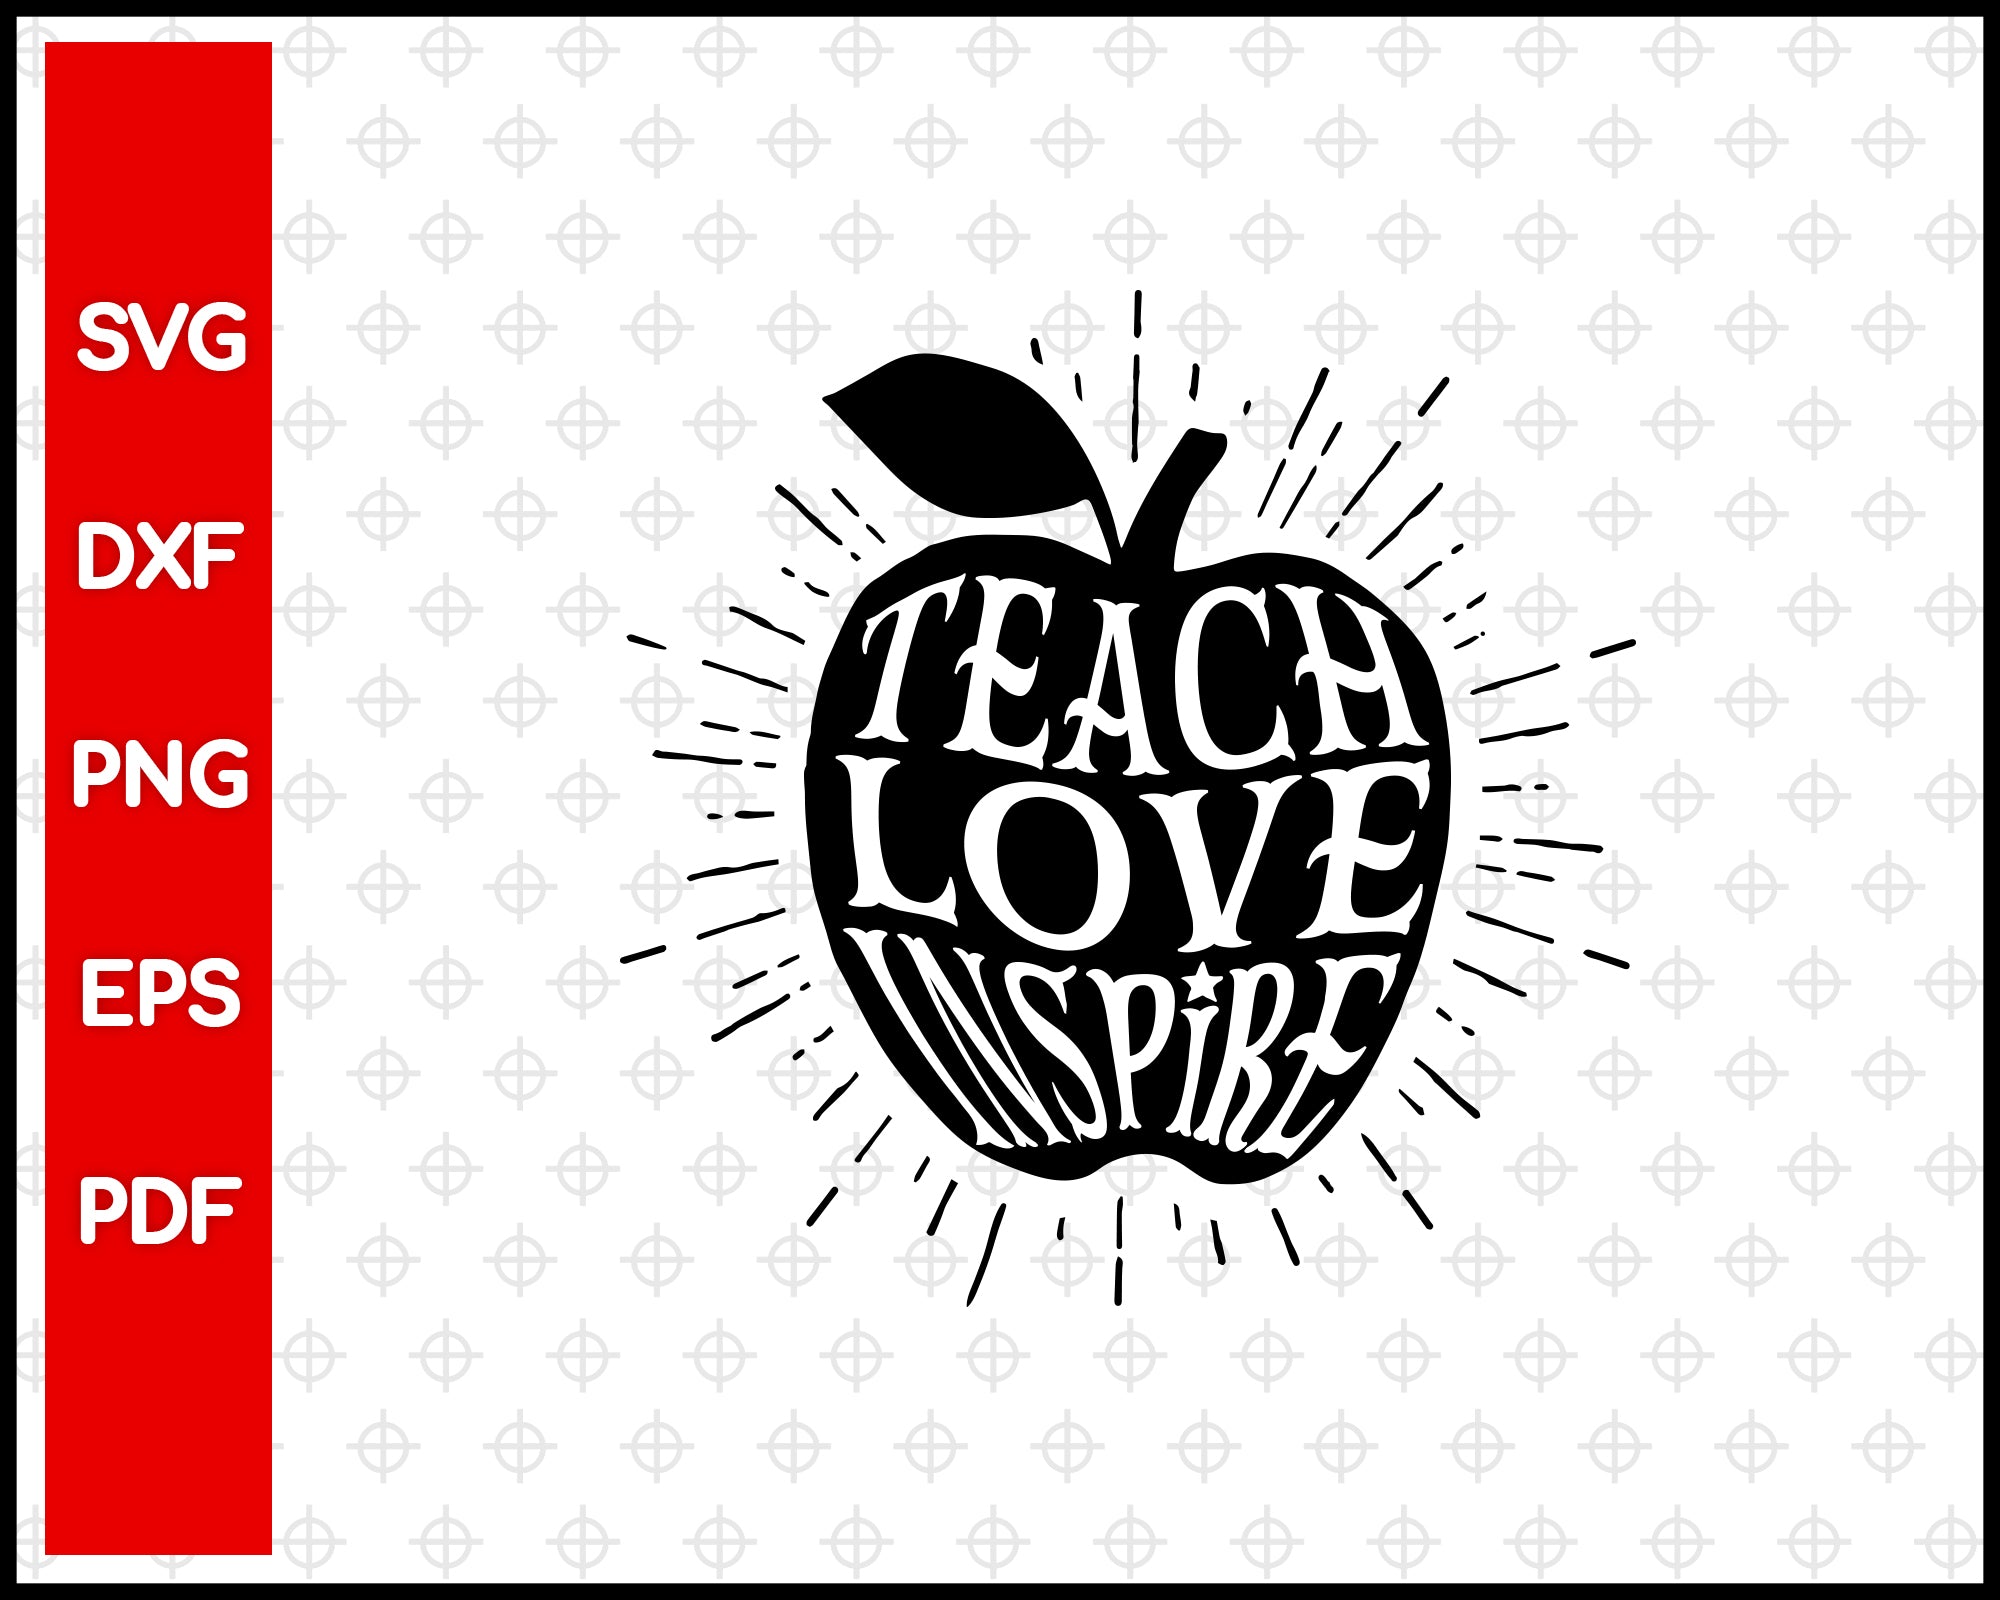 Teach Love Inspire svg Designs For Cricut Silhouette And eps png Printable Files